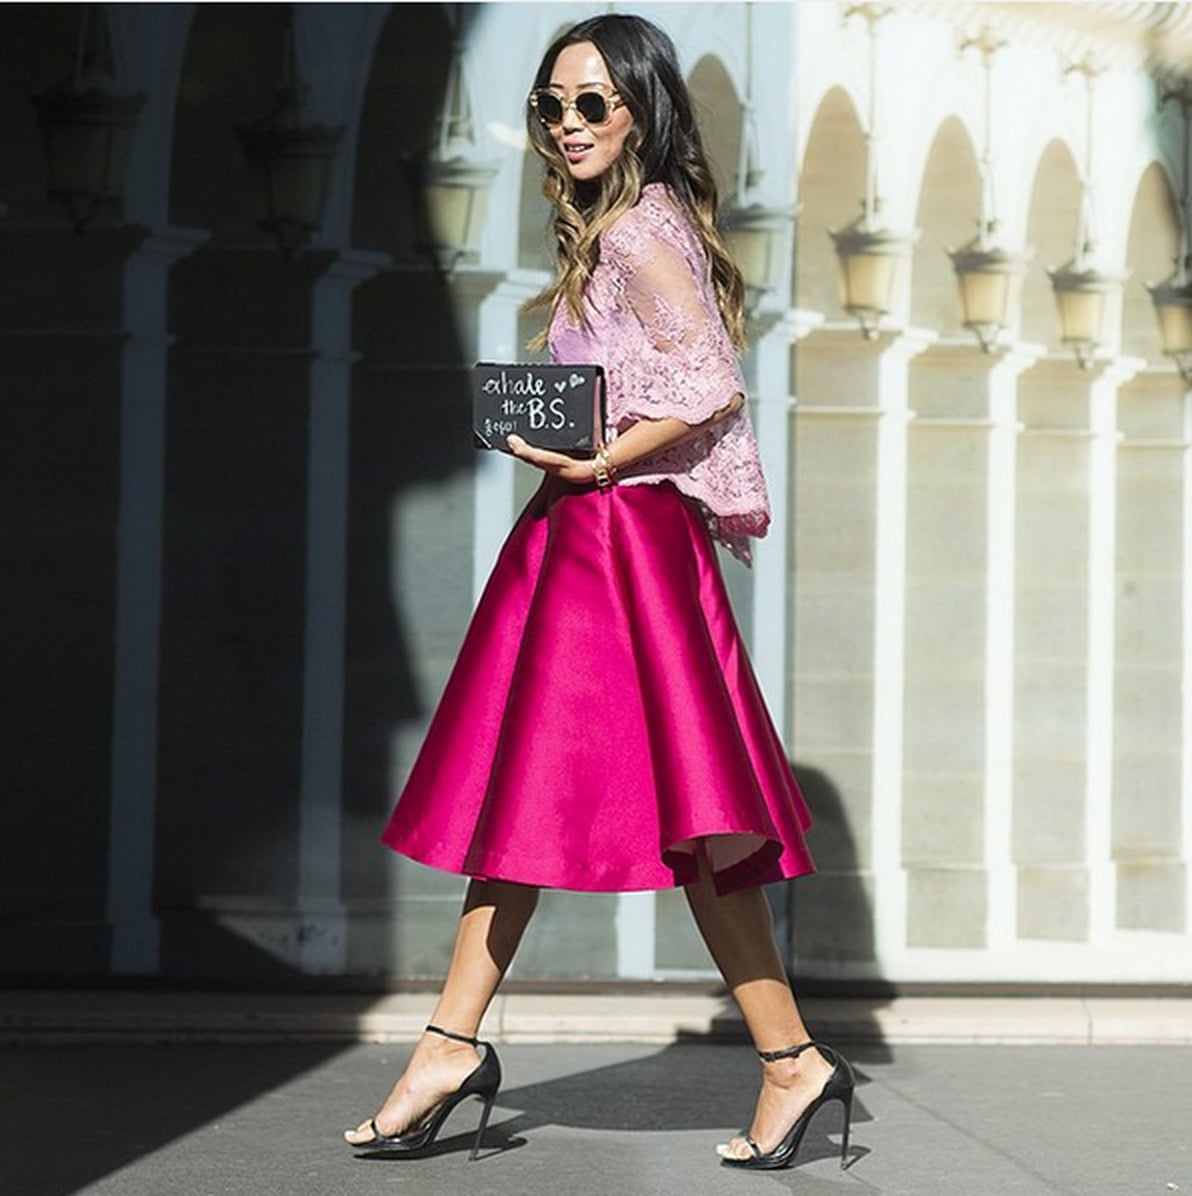 Pink Outfit Ideas and Inspiration | POPSUGAR Fashion